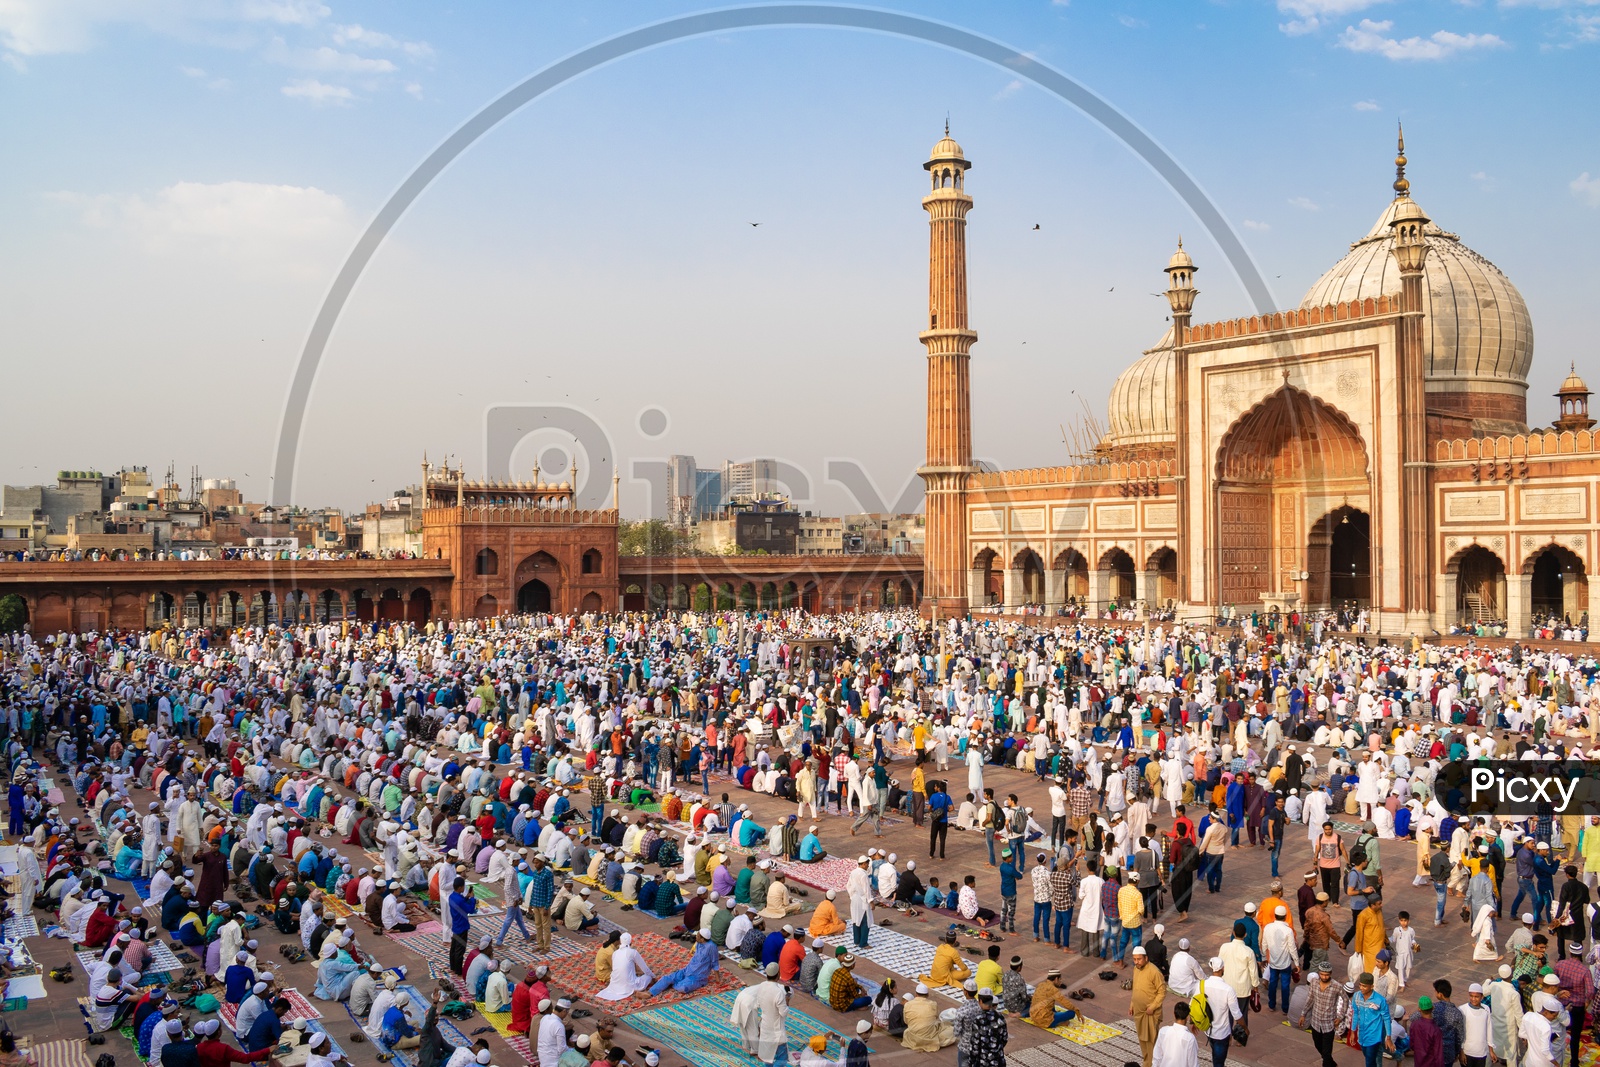 People preparing for Namaz on the day of Eid-ul-Fitr (End of the holy month of Ramadan) at Jama Masjid, Delhi